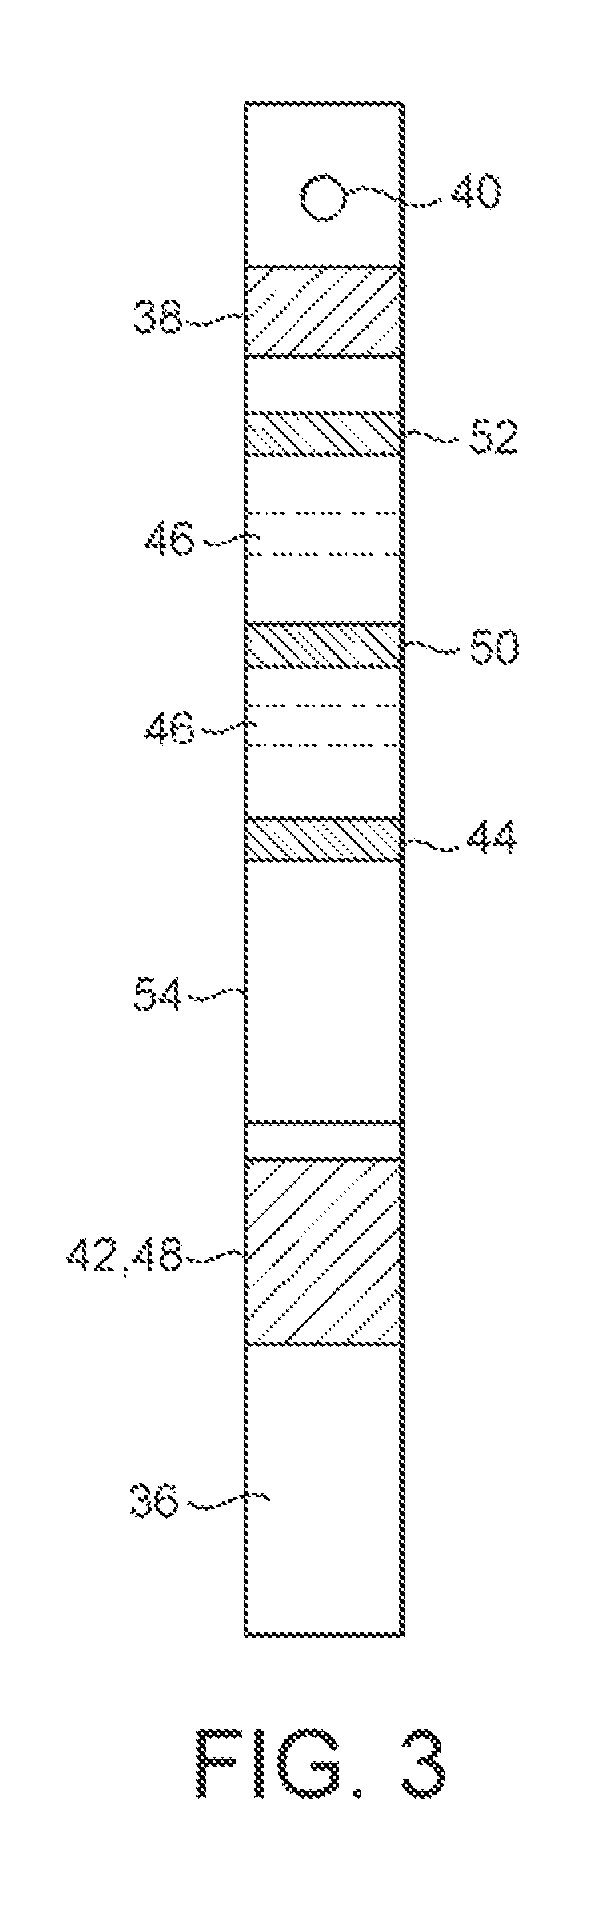 Pregnancy test device and method